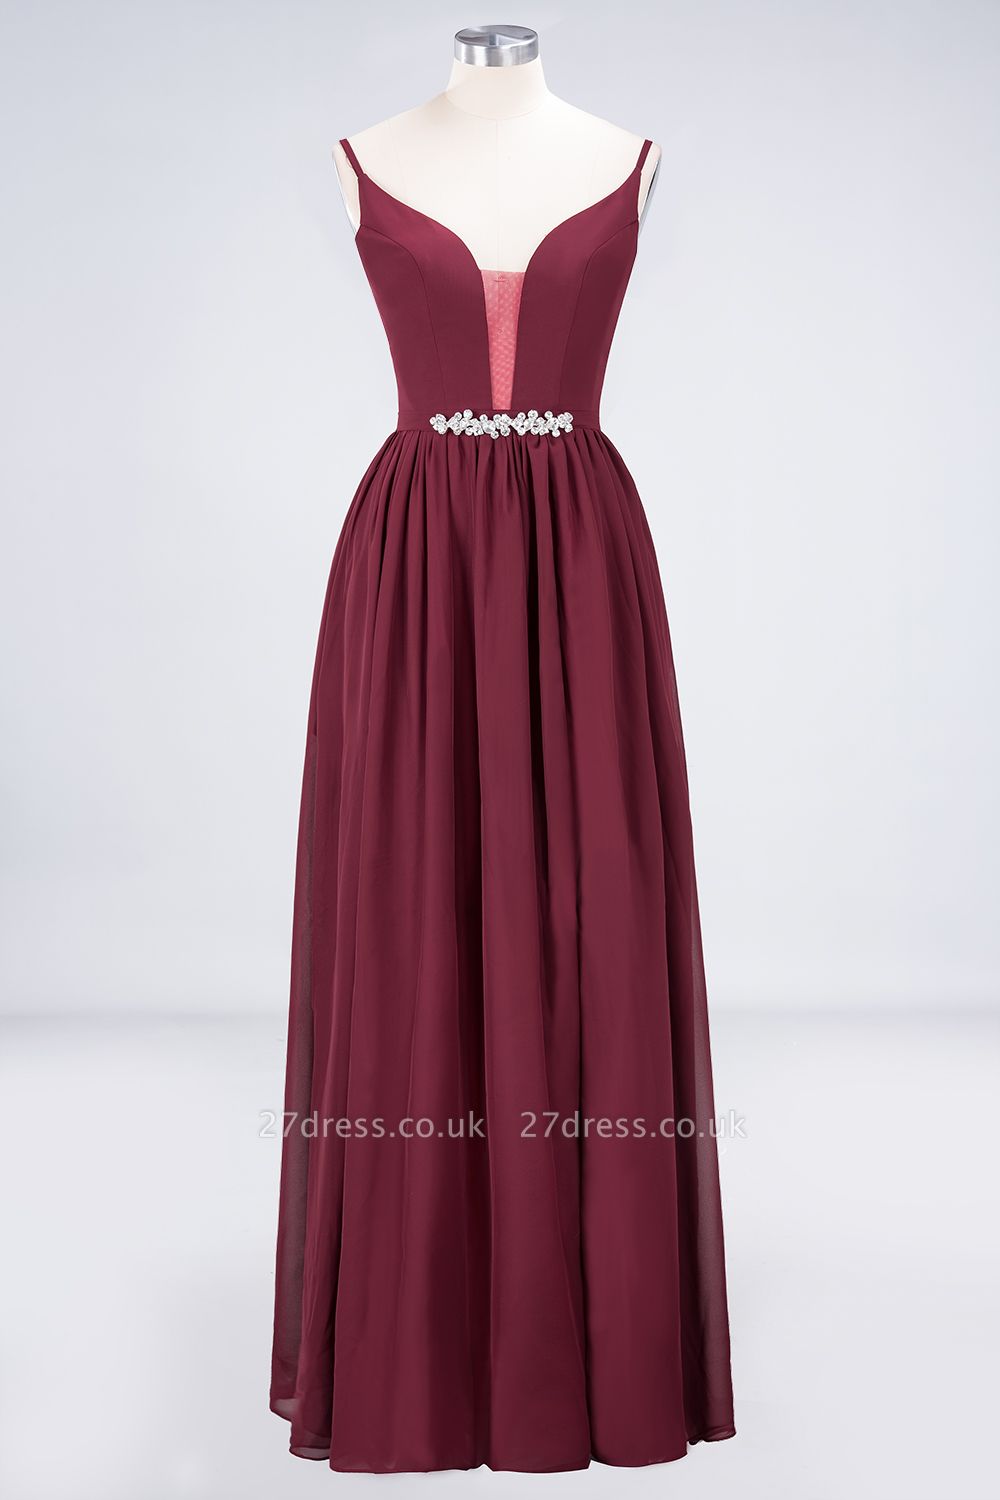 Sexy A-line Flowy Appliques Spaghetti-Straps Deep-Alluring V-neck Sleeveless Floor-Length Bridesmaid Dress UK UK with Ruffles